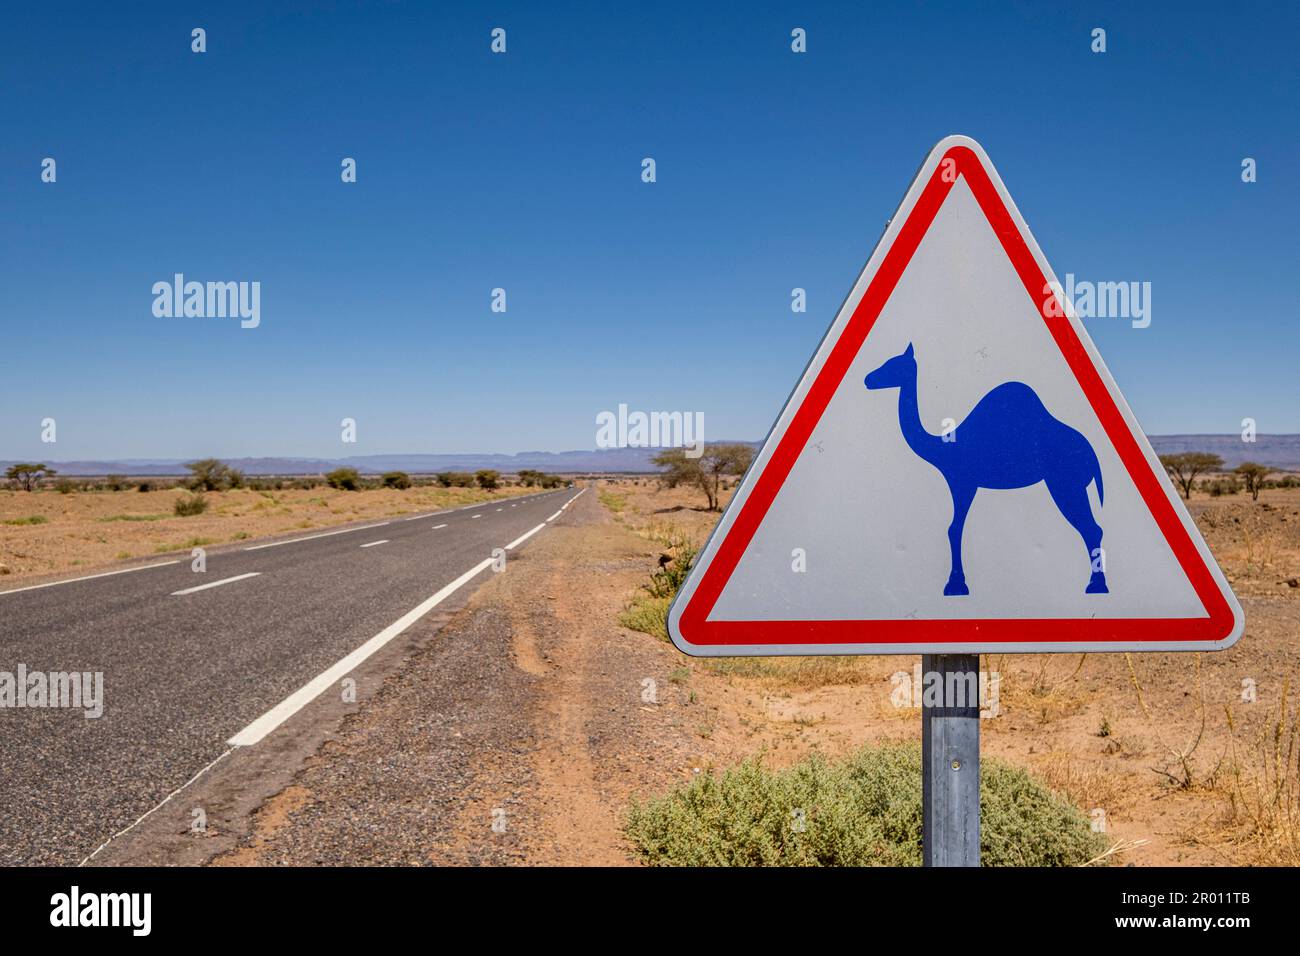 Notice of camels at large, M'Hamid road, Zagora region,Morocco, Africa Stock Photo